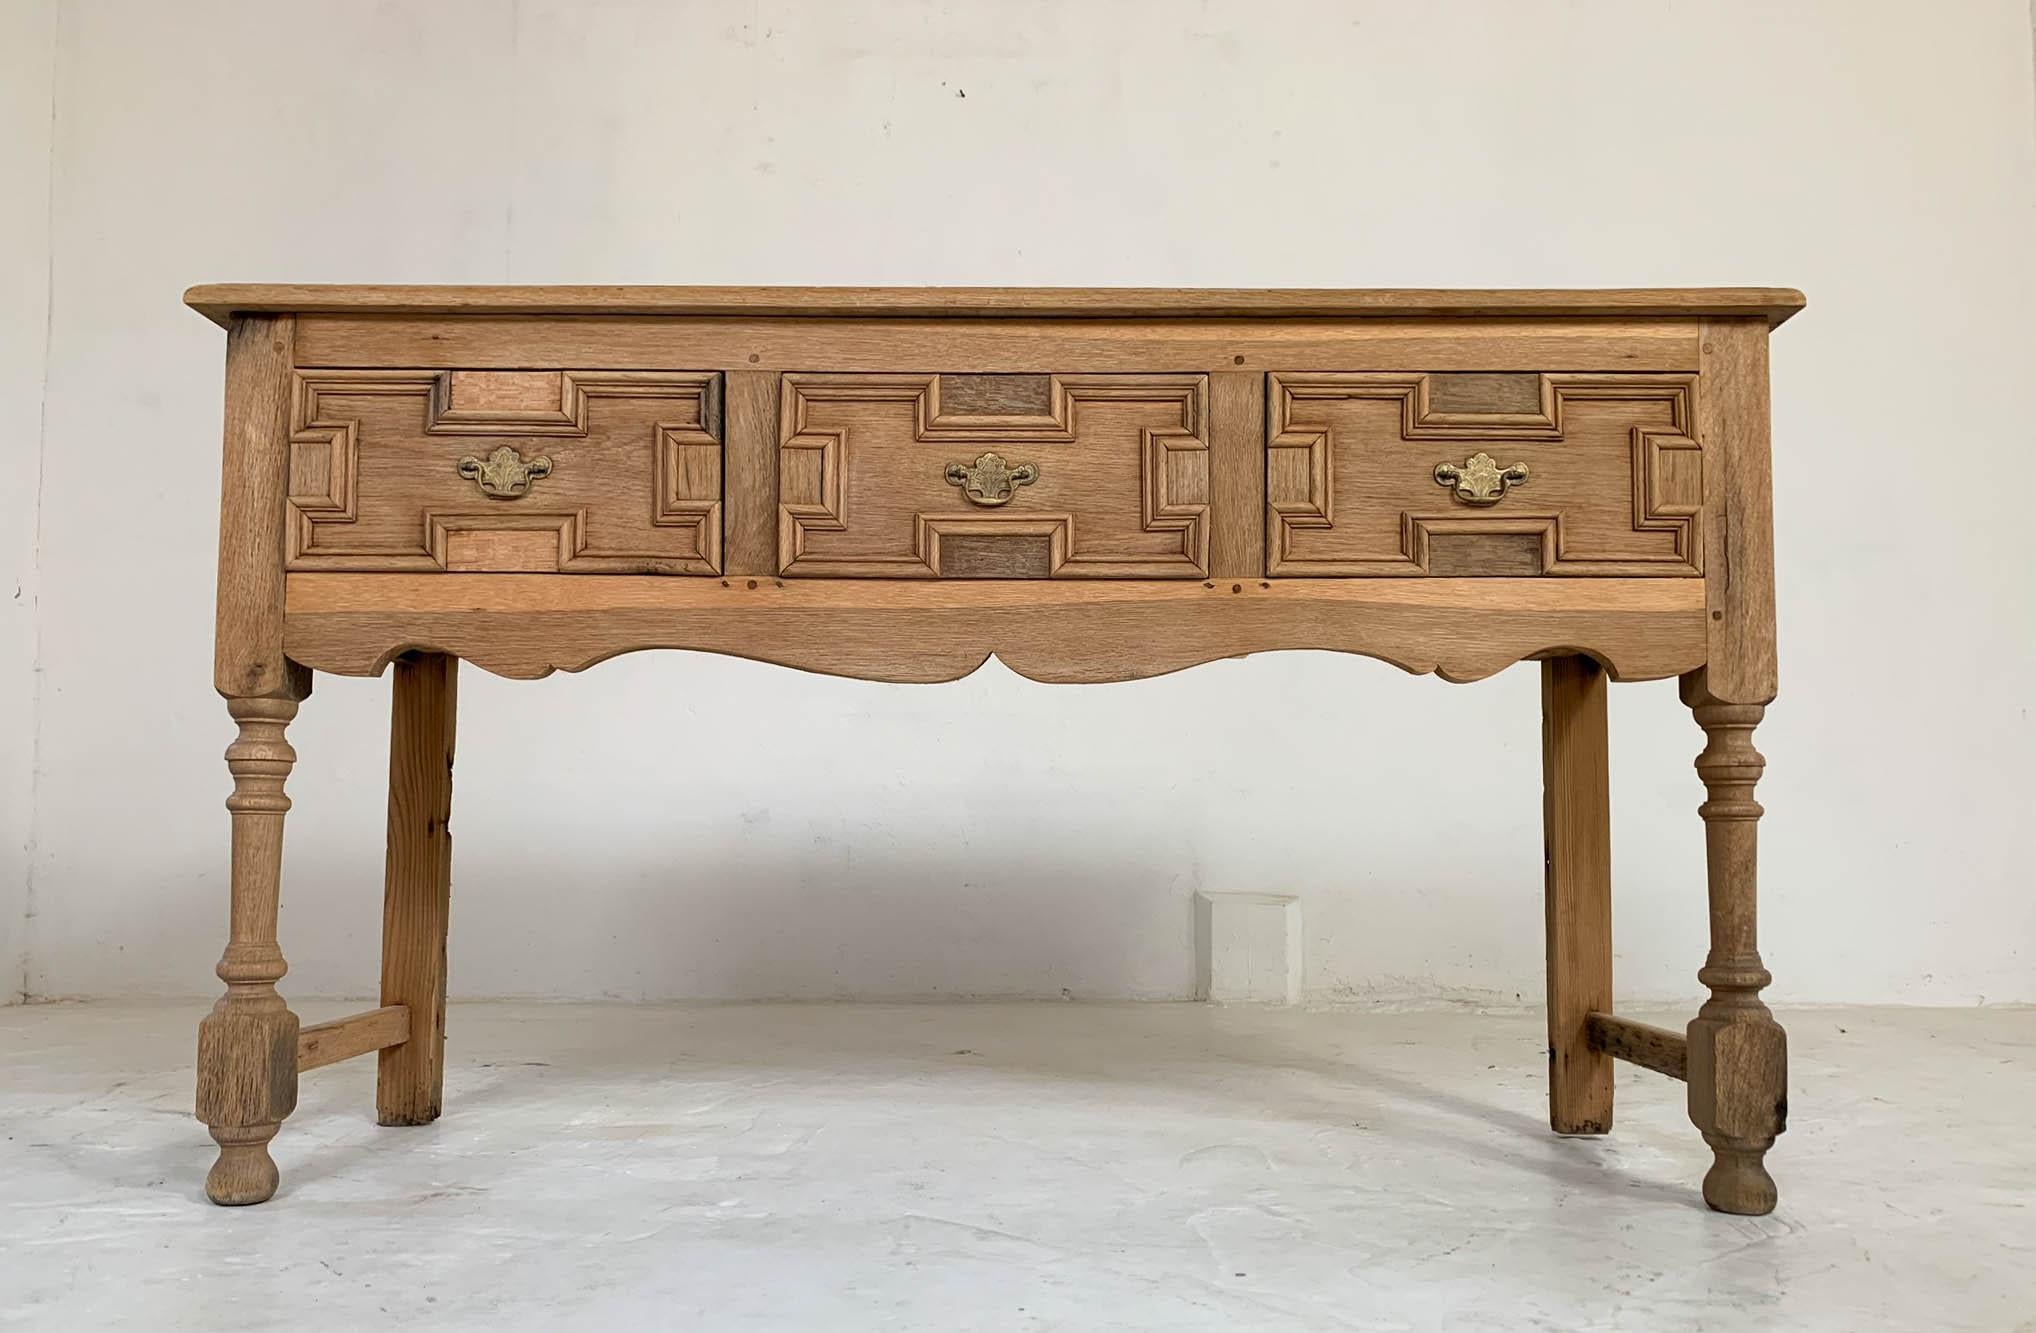 Three drawer bleached oak dresser base dating from early 20th century. It has original brass handles, turned front legs and straight back legs. The back two feet have some damage however this does not affect how the dresser stands. There is also a